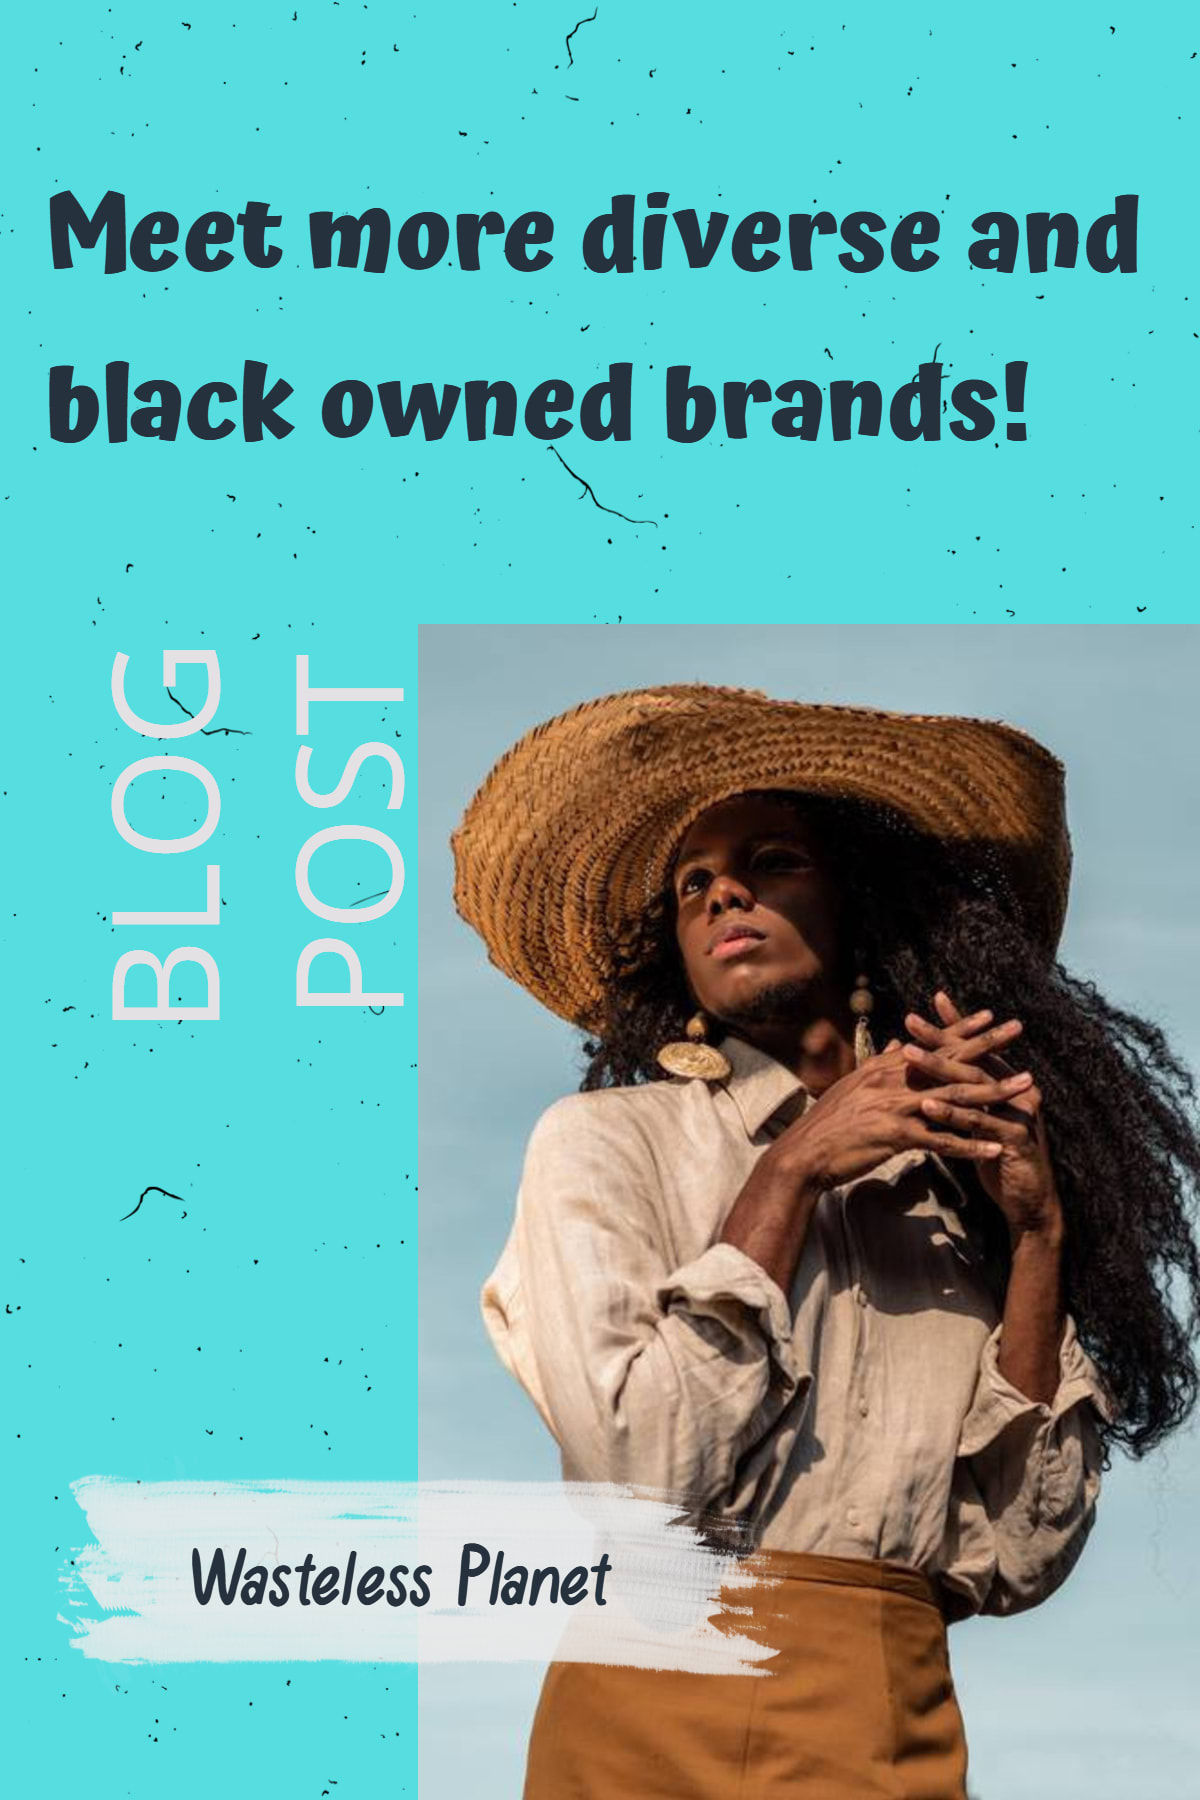 Meet more diverse and black owned brands!